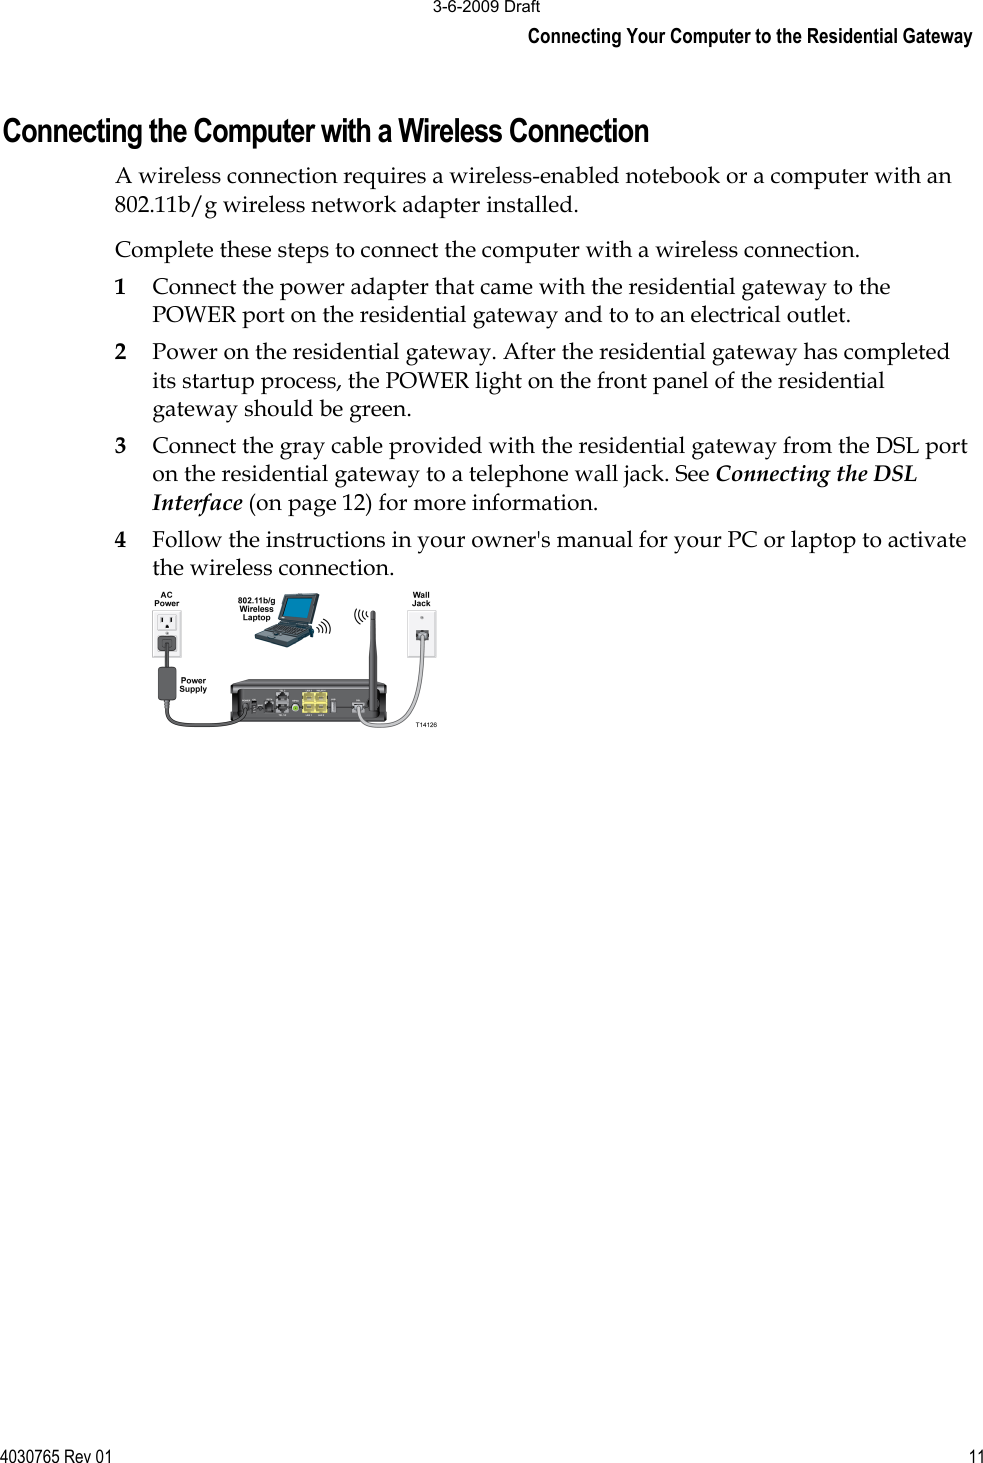 Connecting Your Computer to the Residential Gateway 4030765 Rev 01 11Connecting the Computer with a Wireless Connection A wireless connection requires a wireless-enabled notebook or a computer with an 802.11b/g wireless network adapter installed. Complete these steps to connect the computer with a wireless connection. 1Connect the power adapter that came with the residential gateway to the POWER port on the residential gateway and to to an electrical outlet.  2Power on the residential gateway. After the residential gateway has completed its startup process, the POWER light on the front panel of the residential gateway should be green. 3Connect the gray cable provided with the residential gateway from the DSL port on the residential gateway to a telephone wall jack. See Connecting the DSL Interface (on page 12) for more information. 4Follow the instructions in your owner&apos;s manual for your PC or laptop to activate the wireless connection. 3-6-2009 Draft